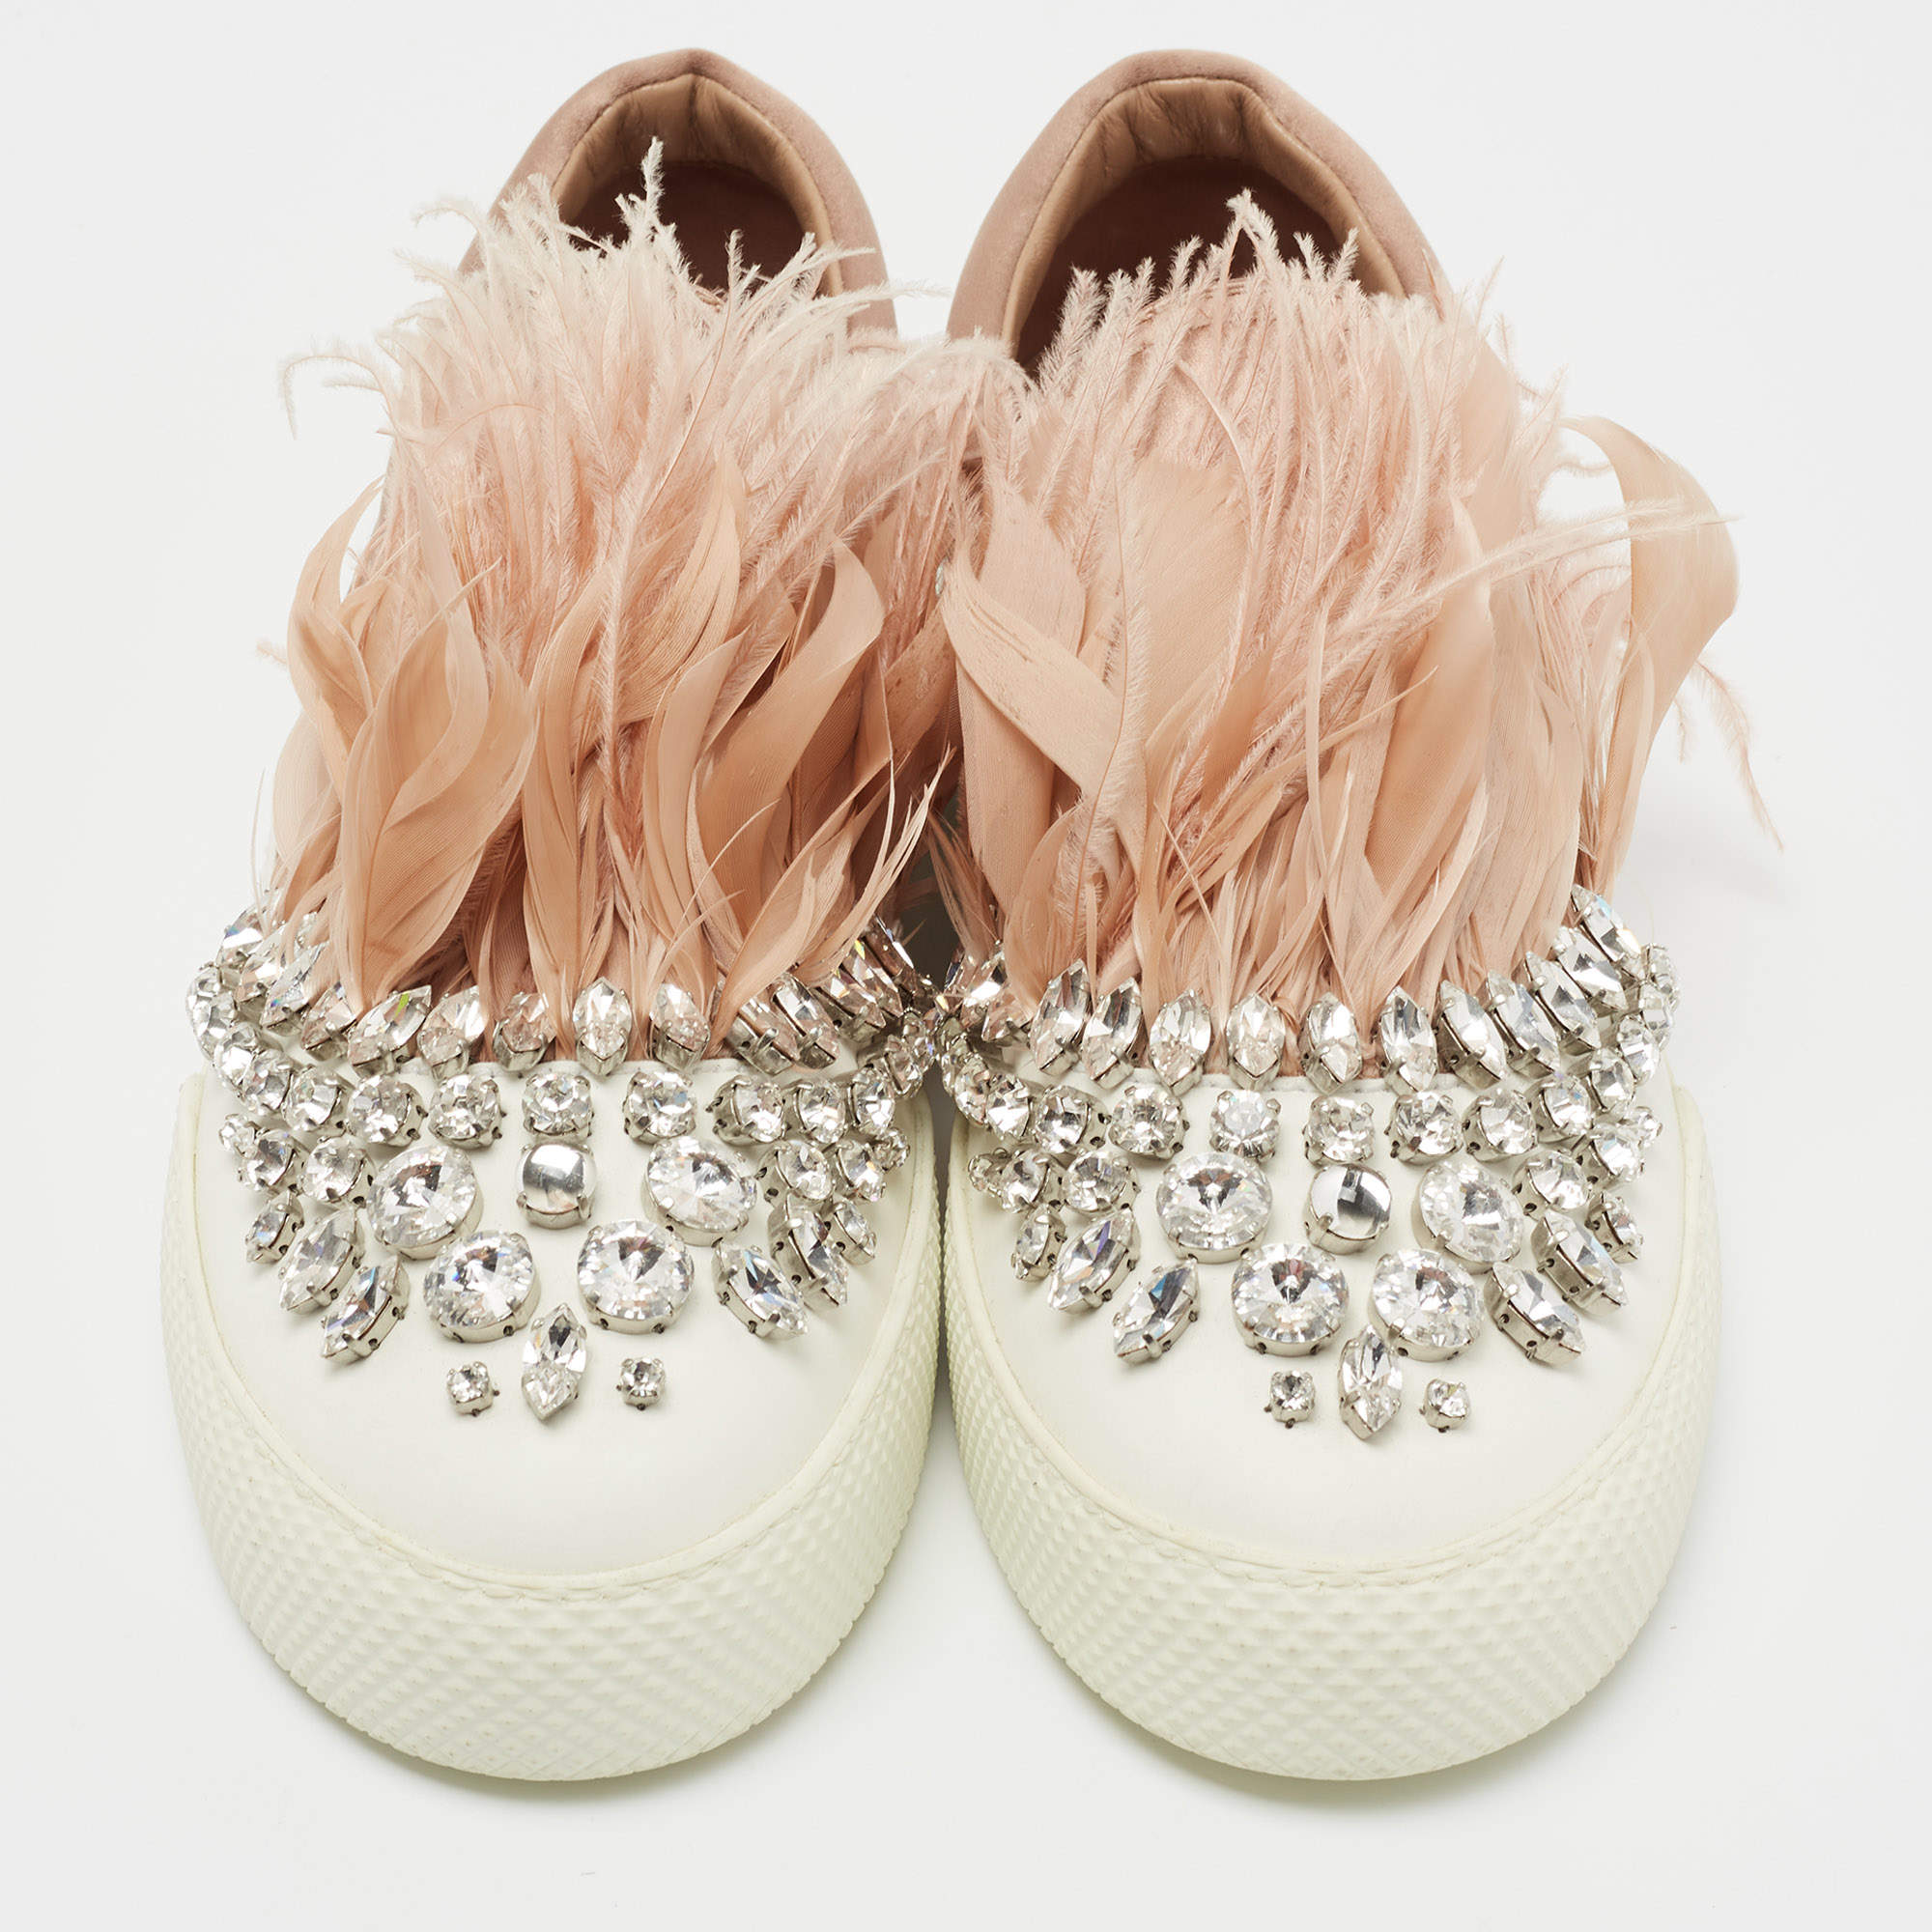 Miu Miu Beige/White Satin and Feather Crystal Embellished Slip On 